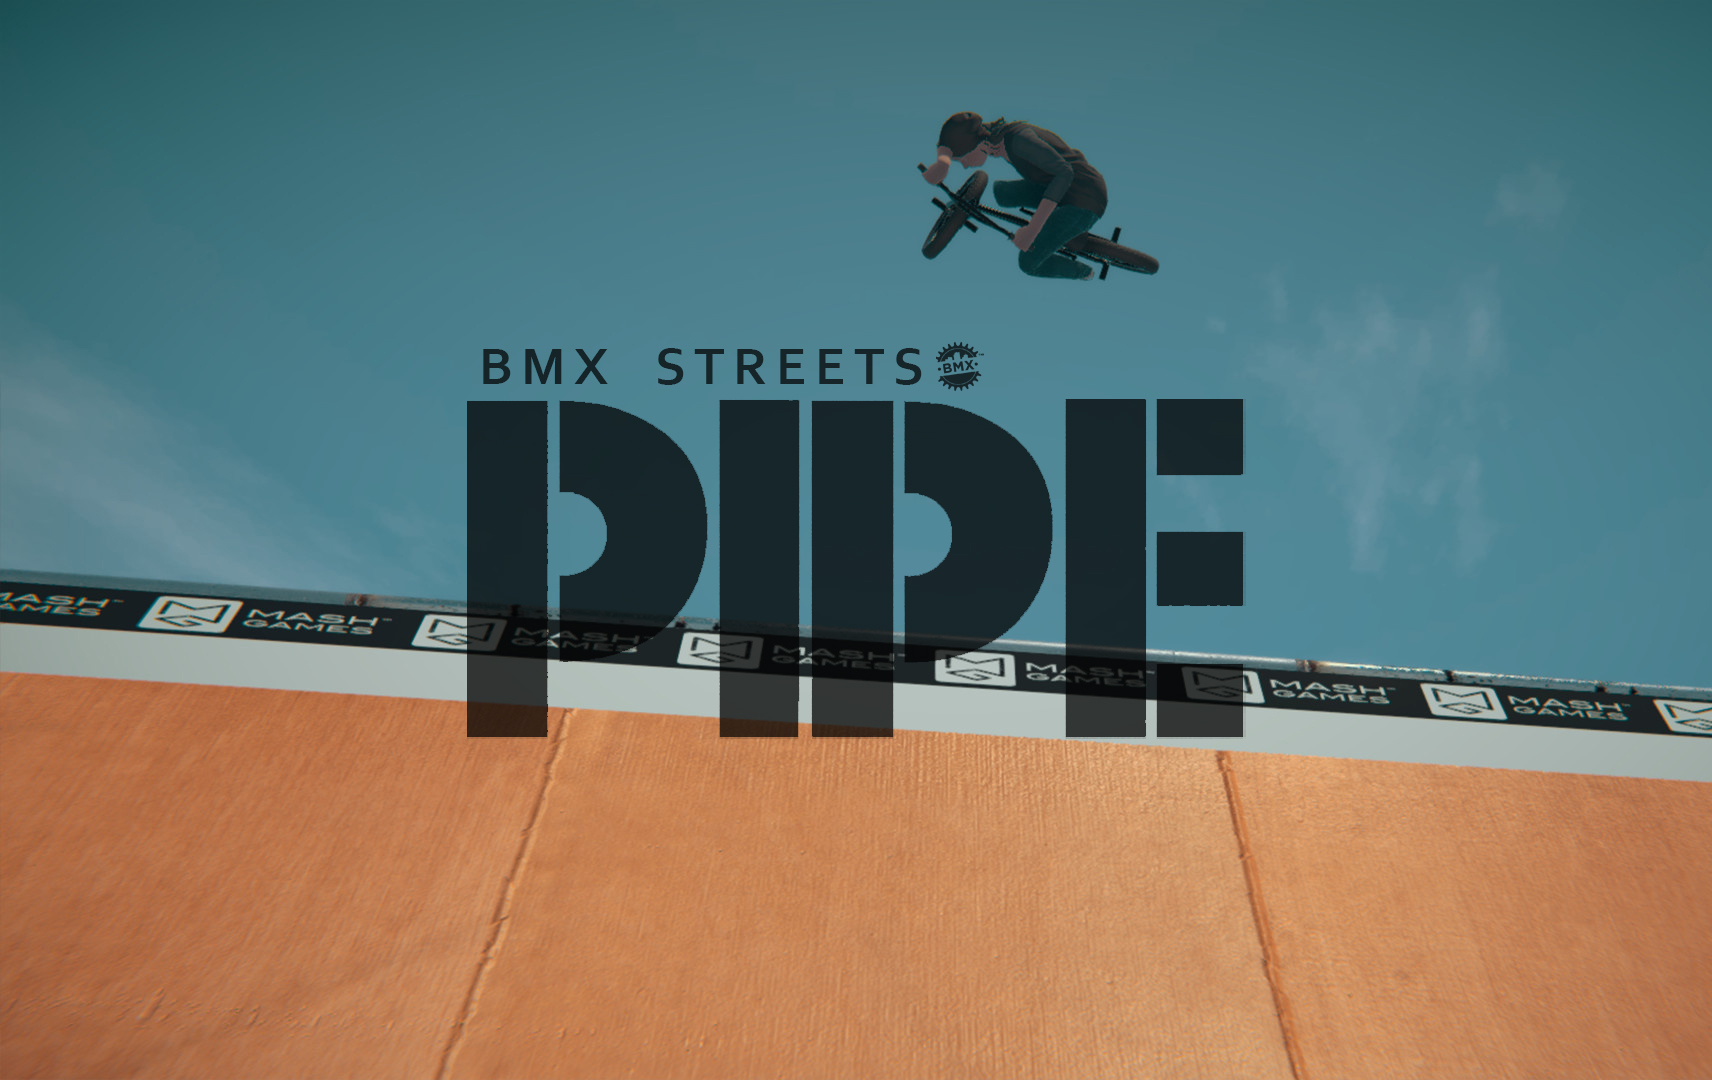 Bmx streets pipe steam фото 17